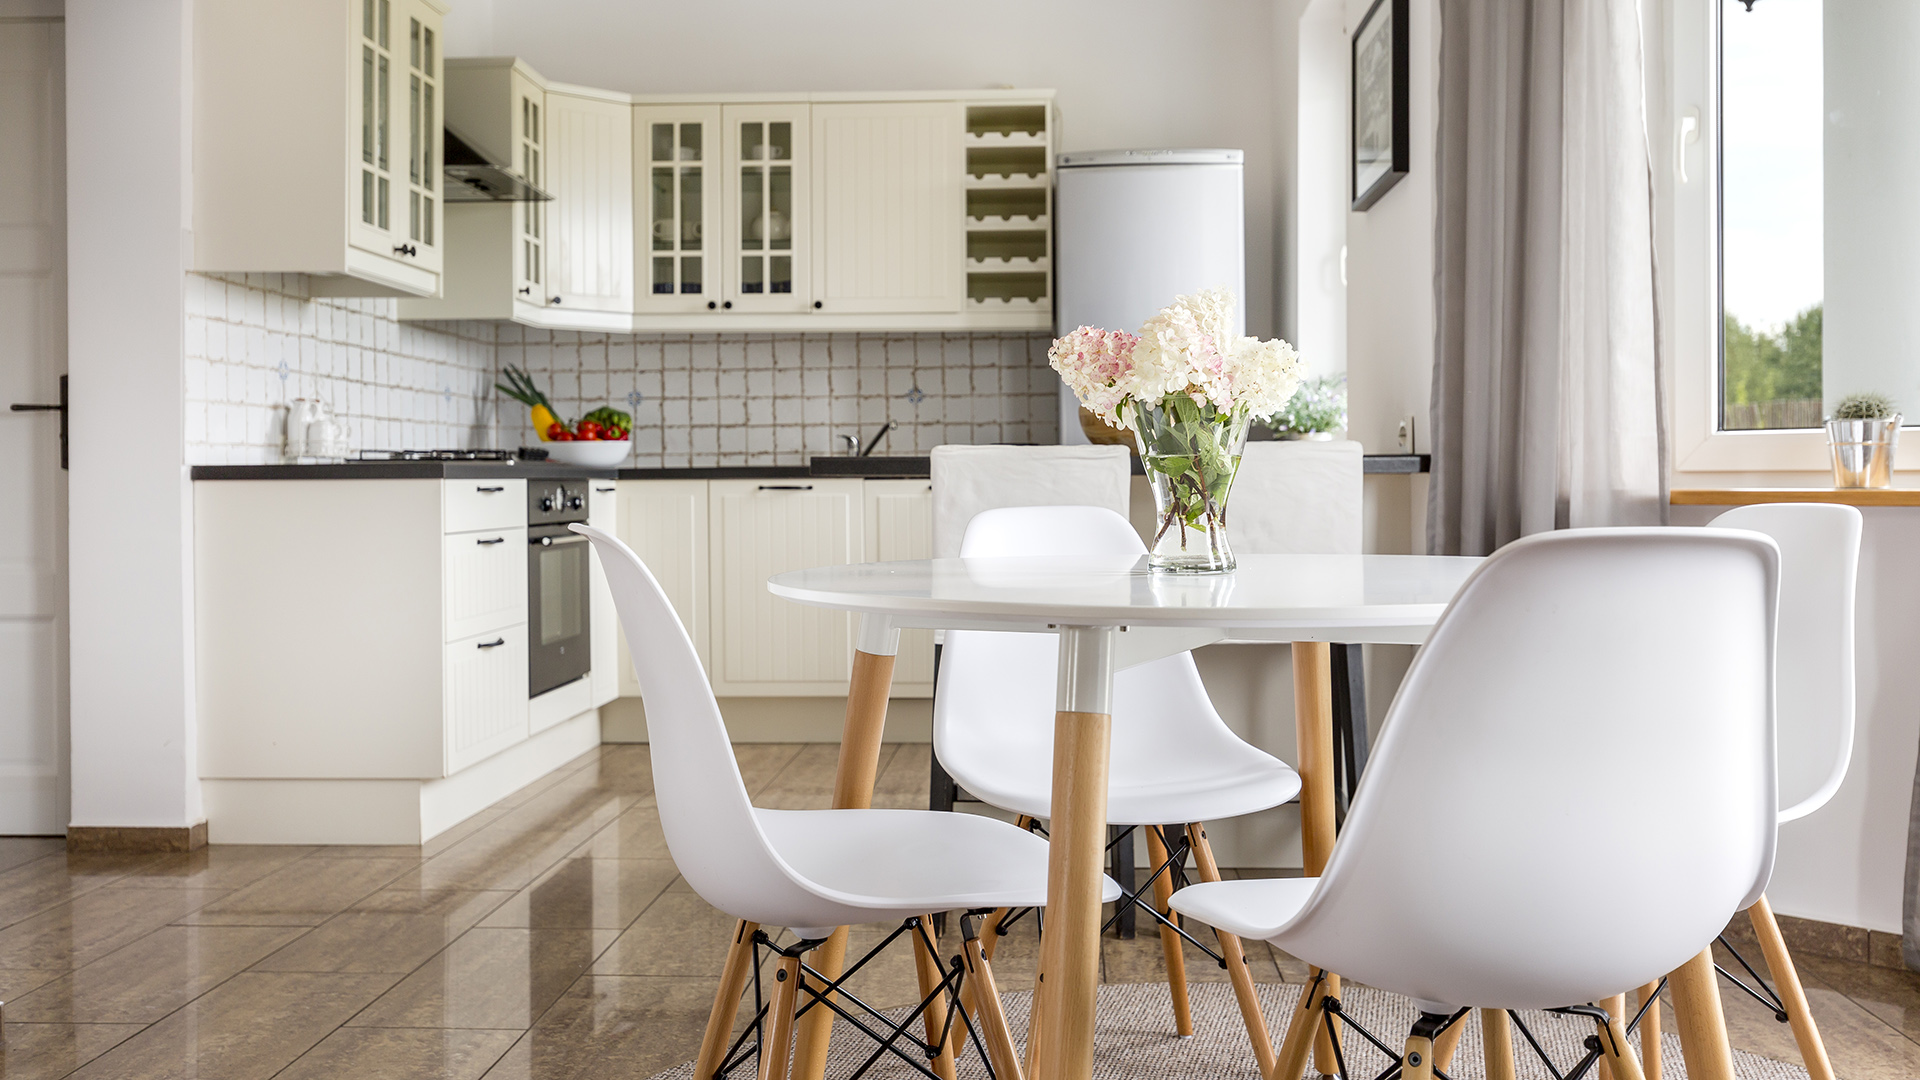 view of a bright open plan kitchen diner